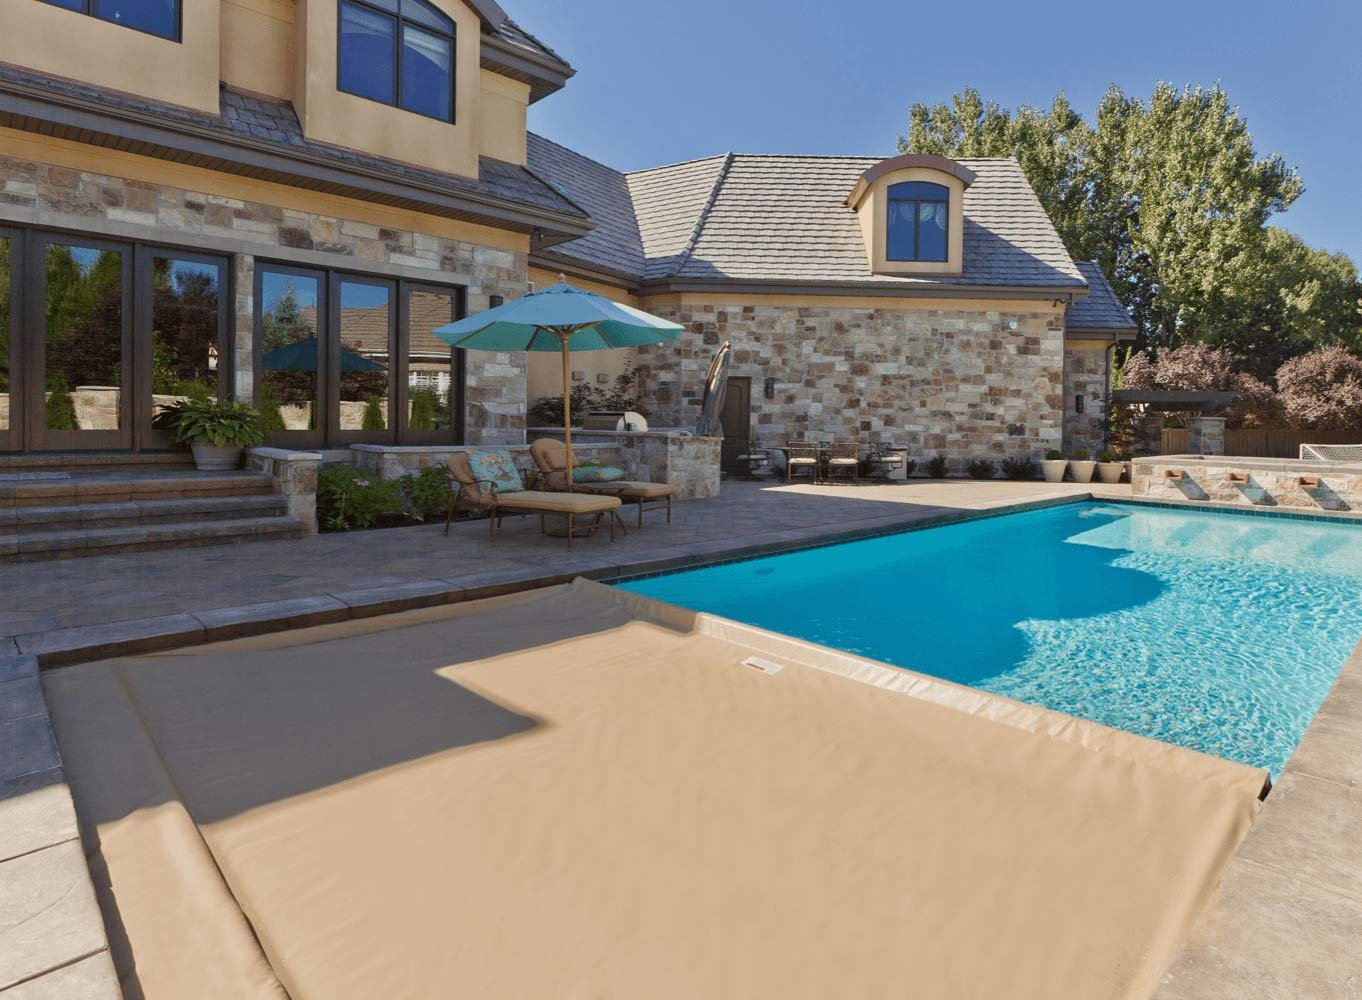 2-2_Automatic-Pool-Covers-Everyday-Protection-For-Your-Family.jpg